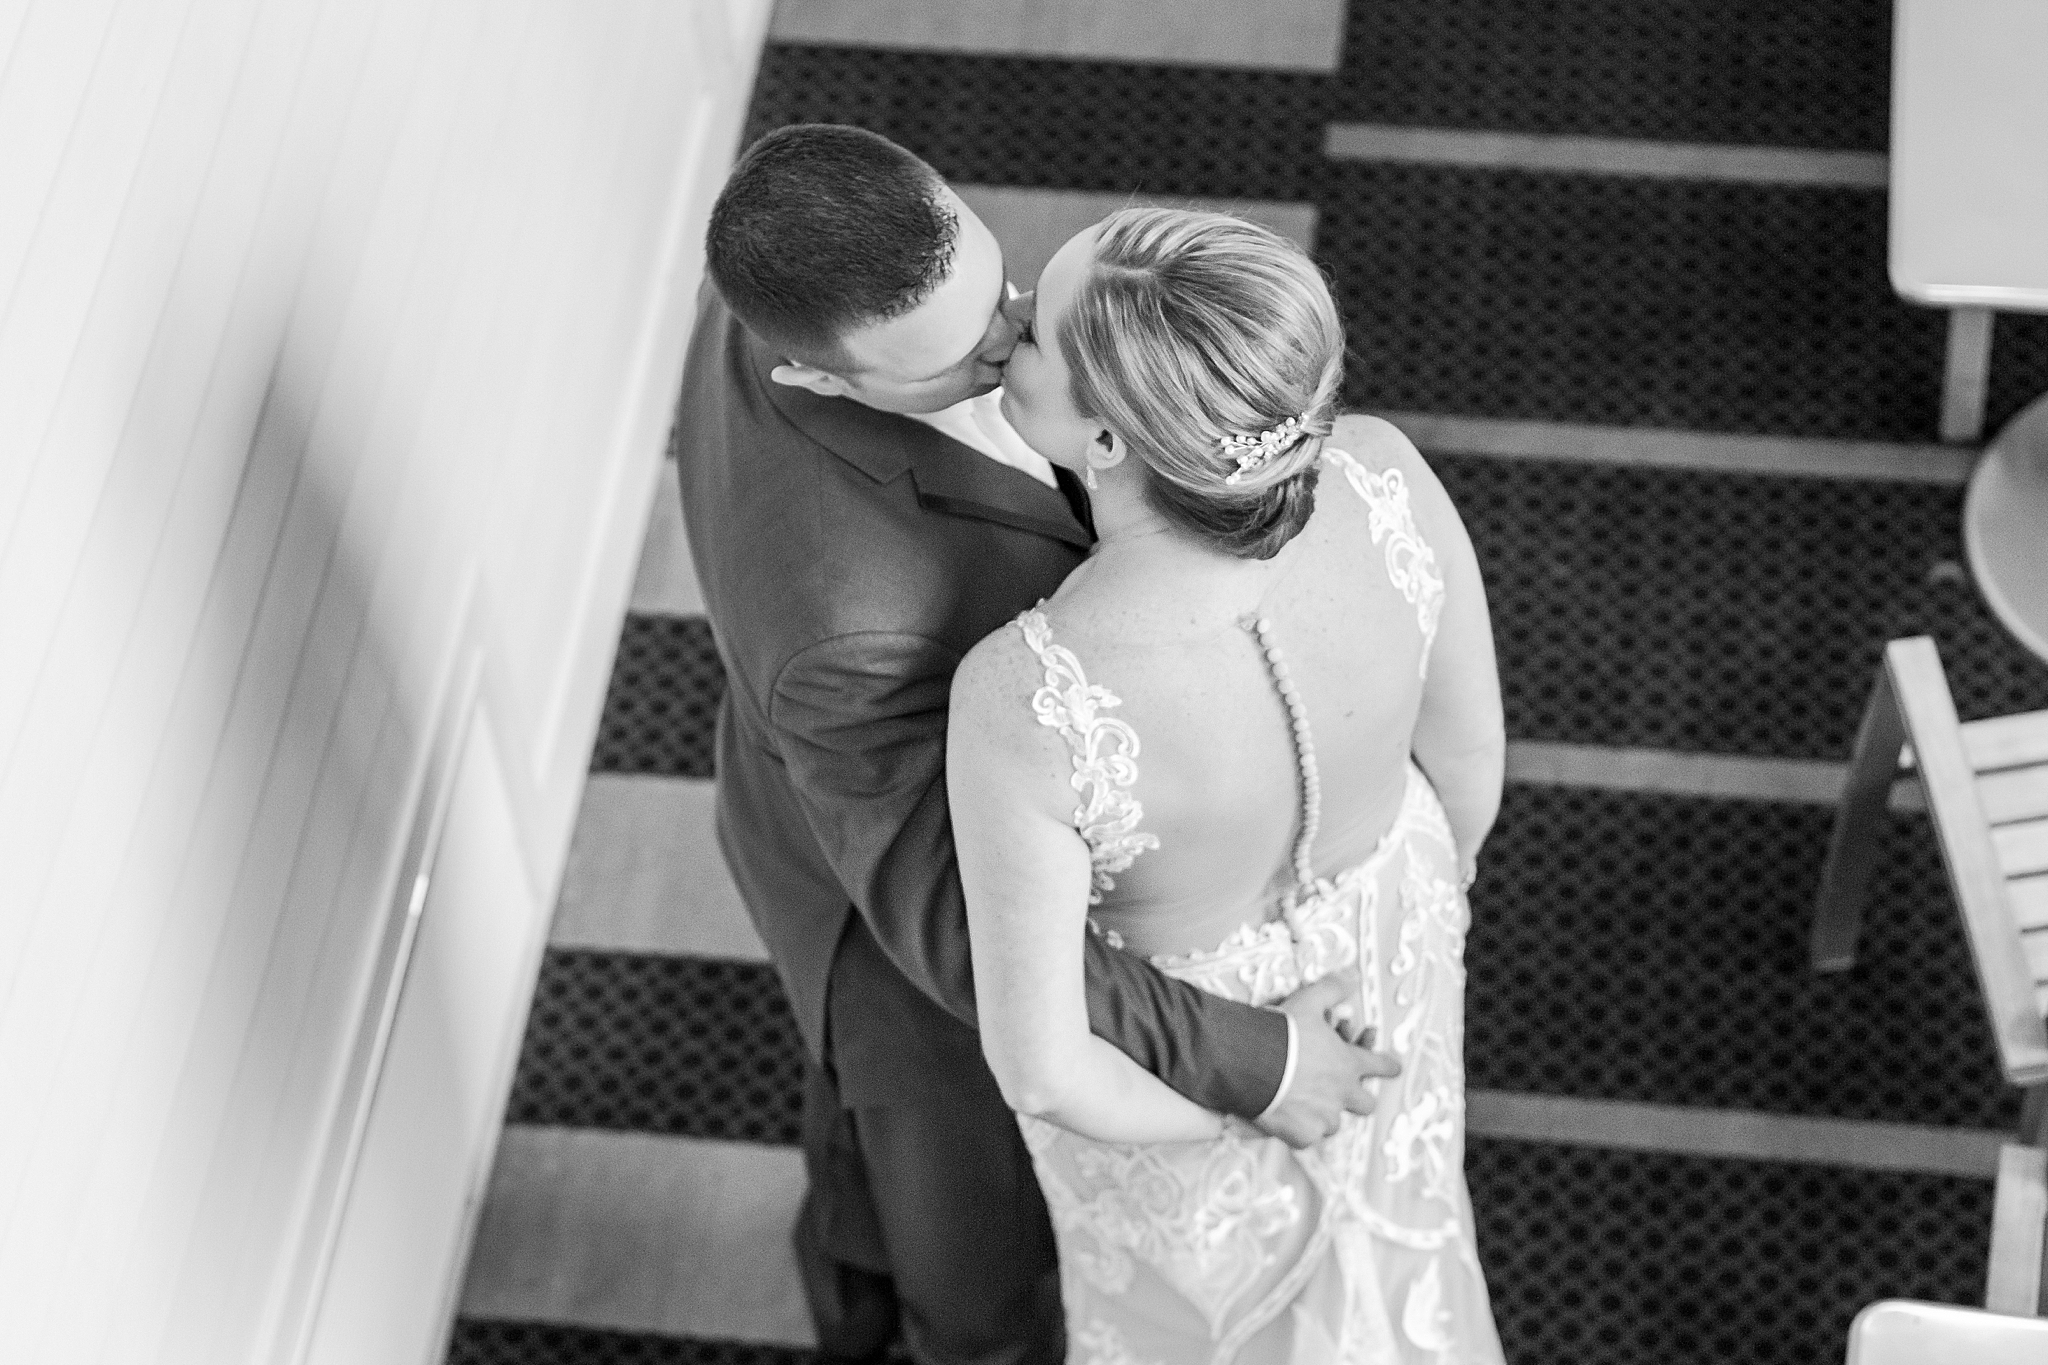 modern-romantic-wedding-photography-at-webers-in-ann-arbor-michigan-by-courtney-carolyn-photography_0055.jpg